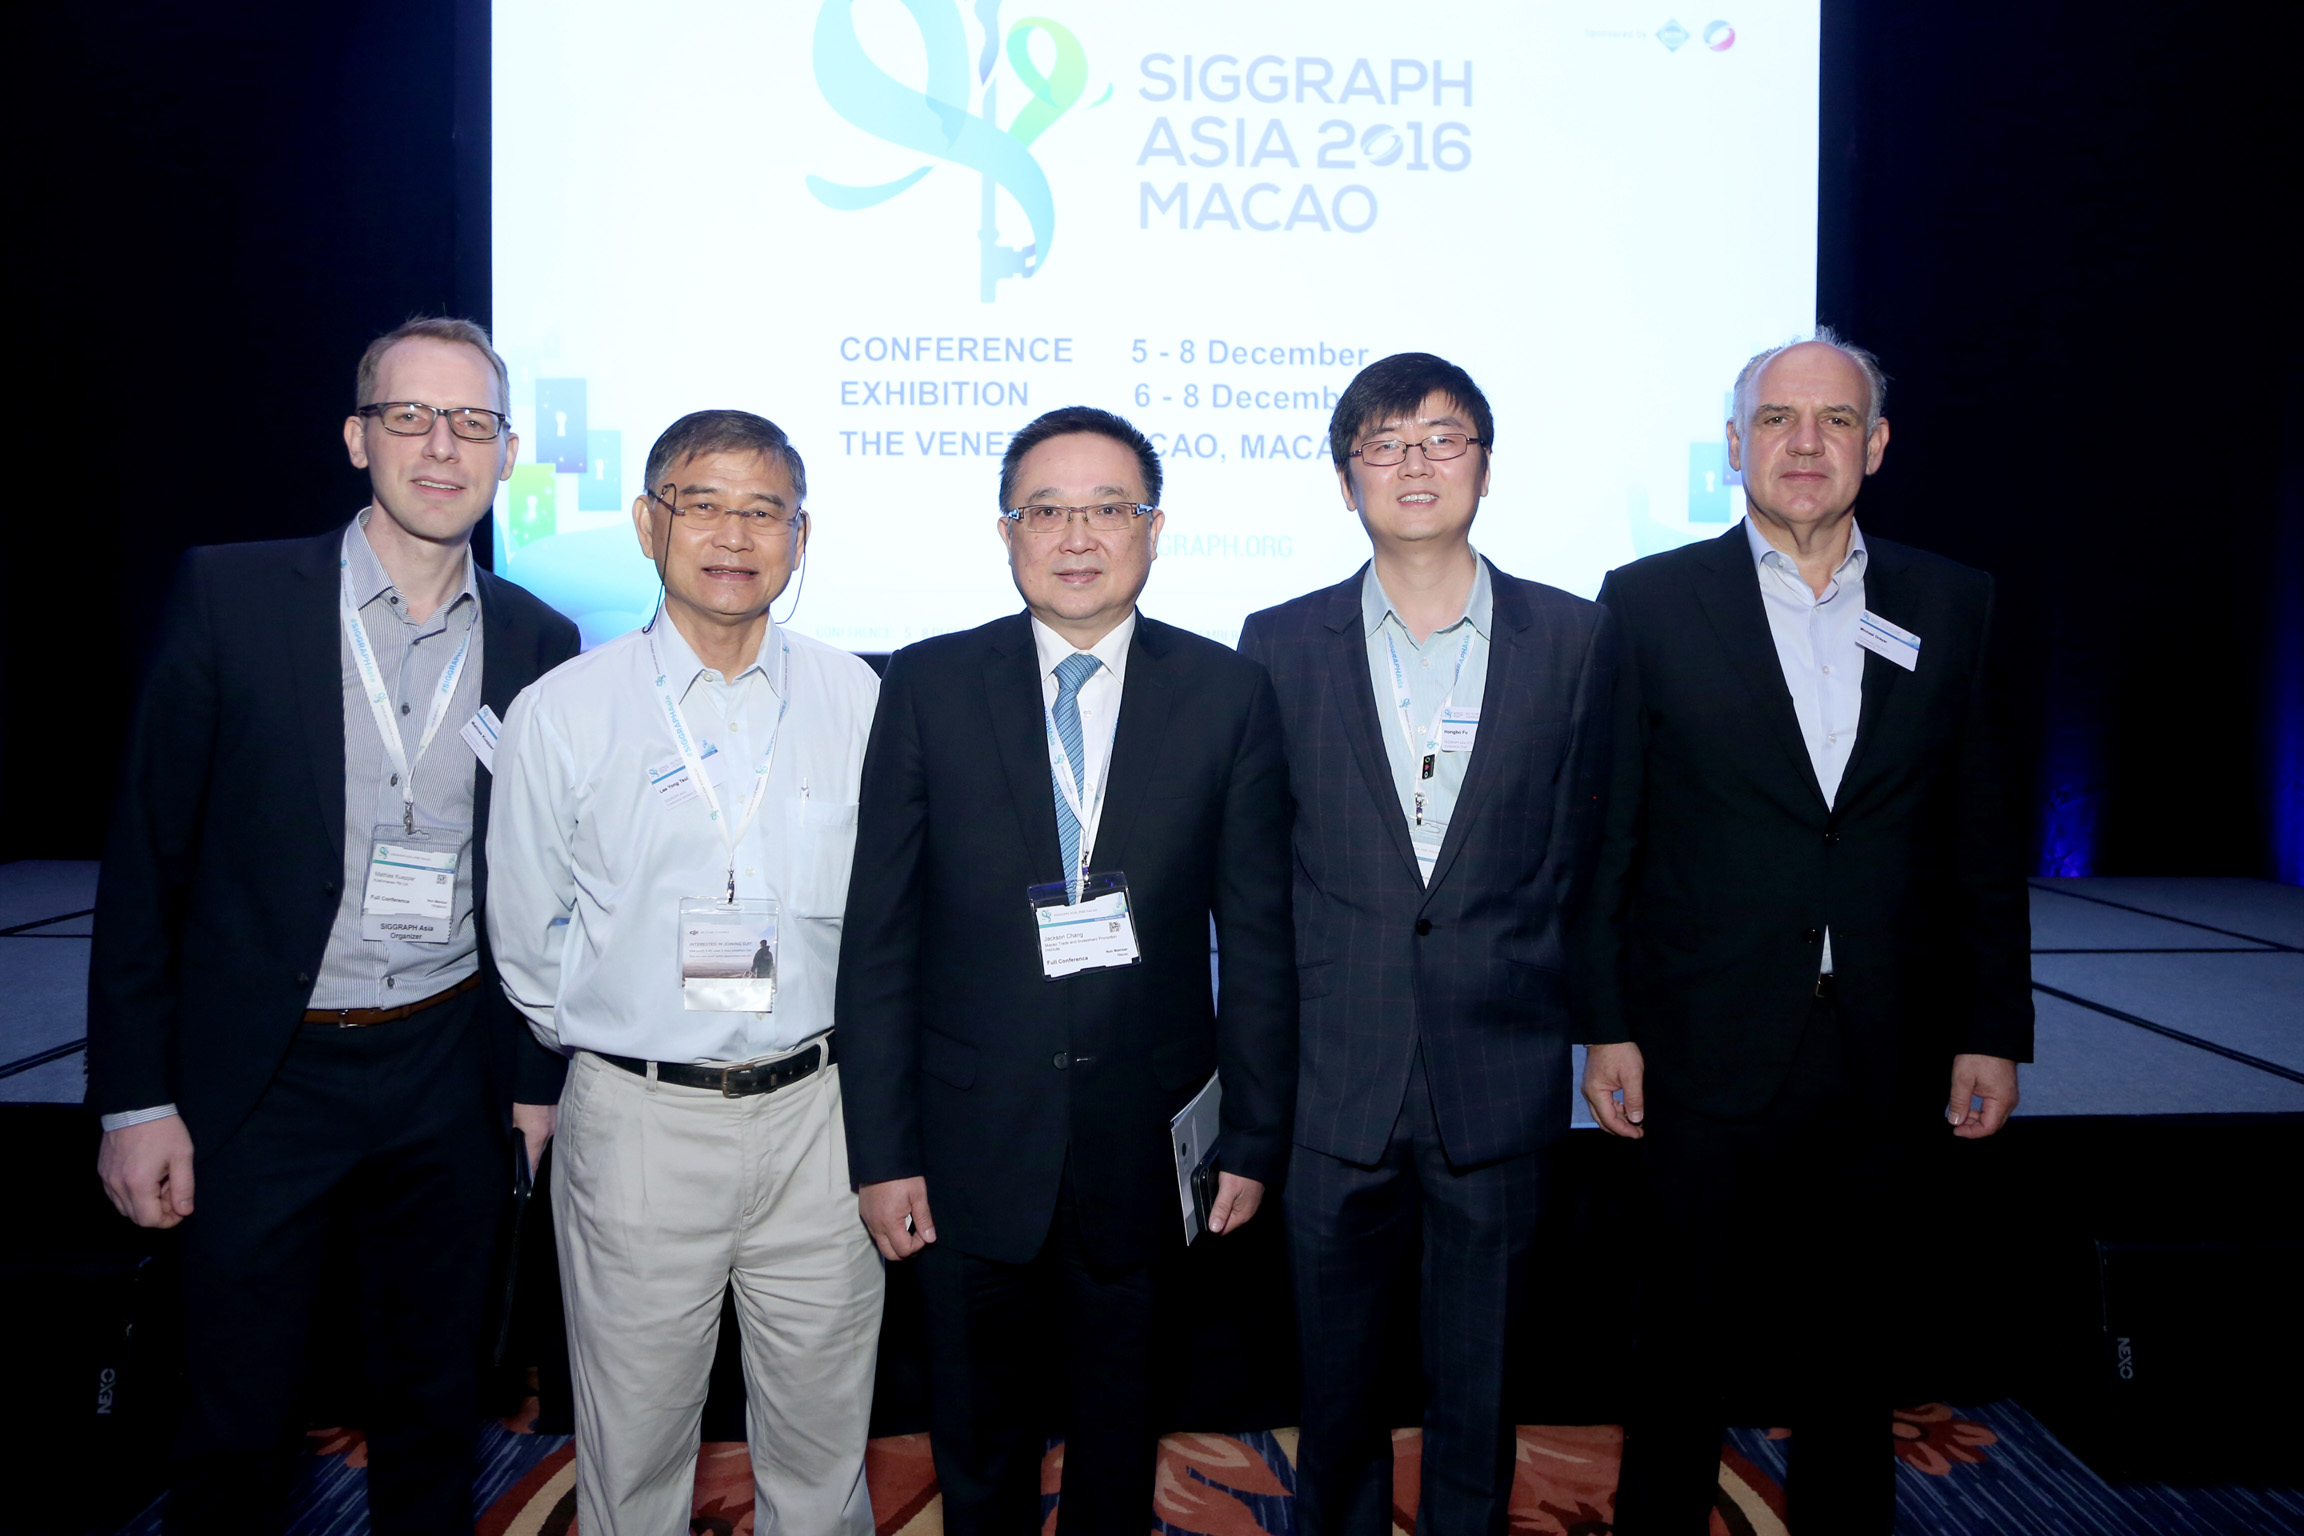 IPIM’s President Jackson Chang attends the SIGGRAPH ASIA 2016 <br>(6 December 2016)